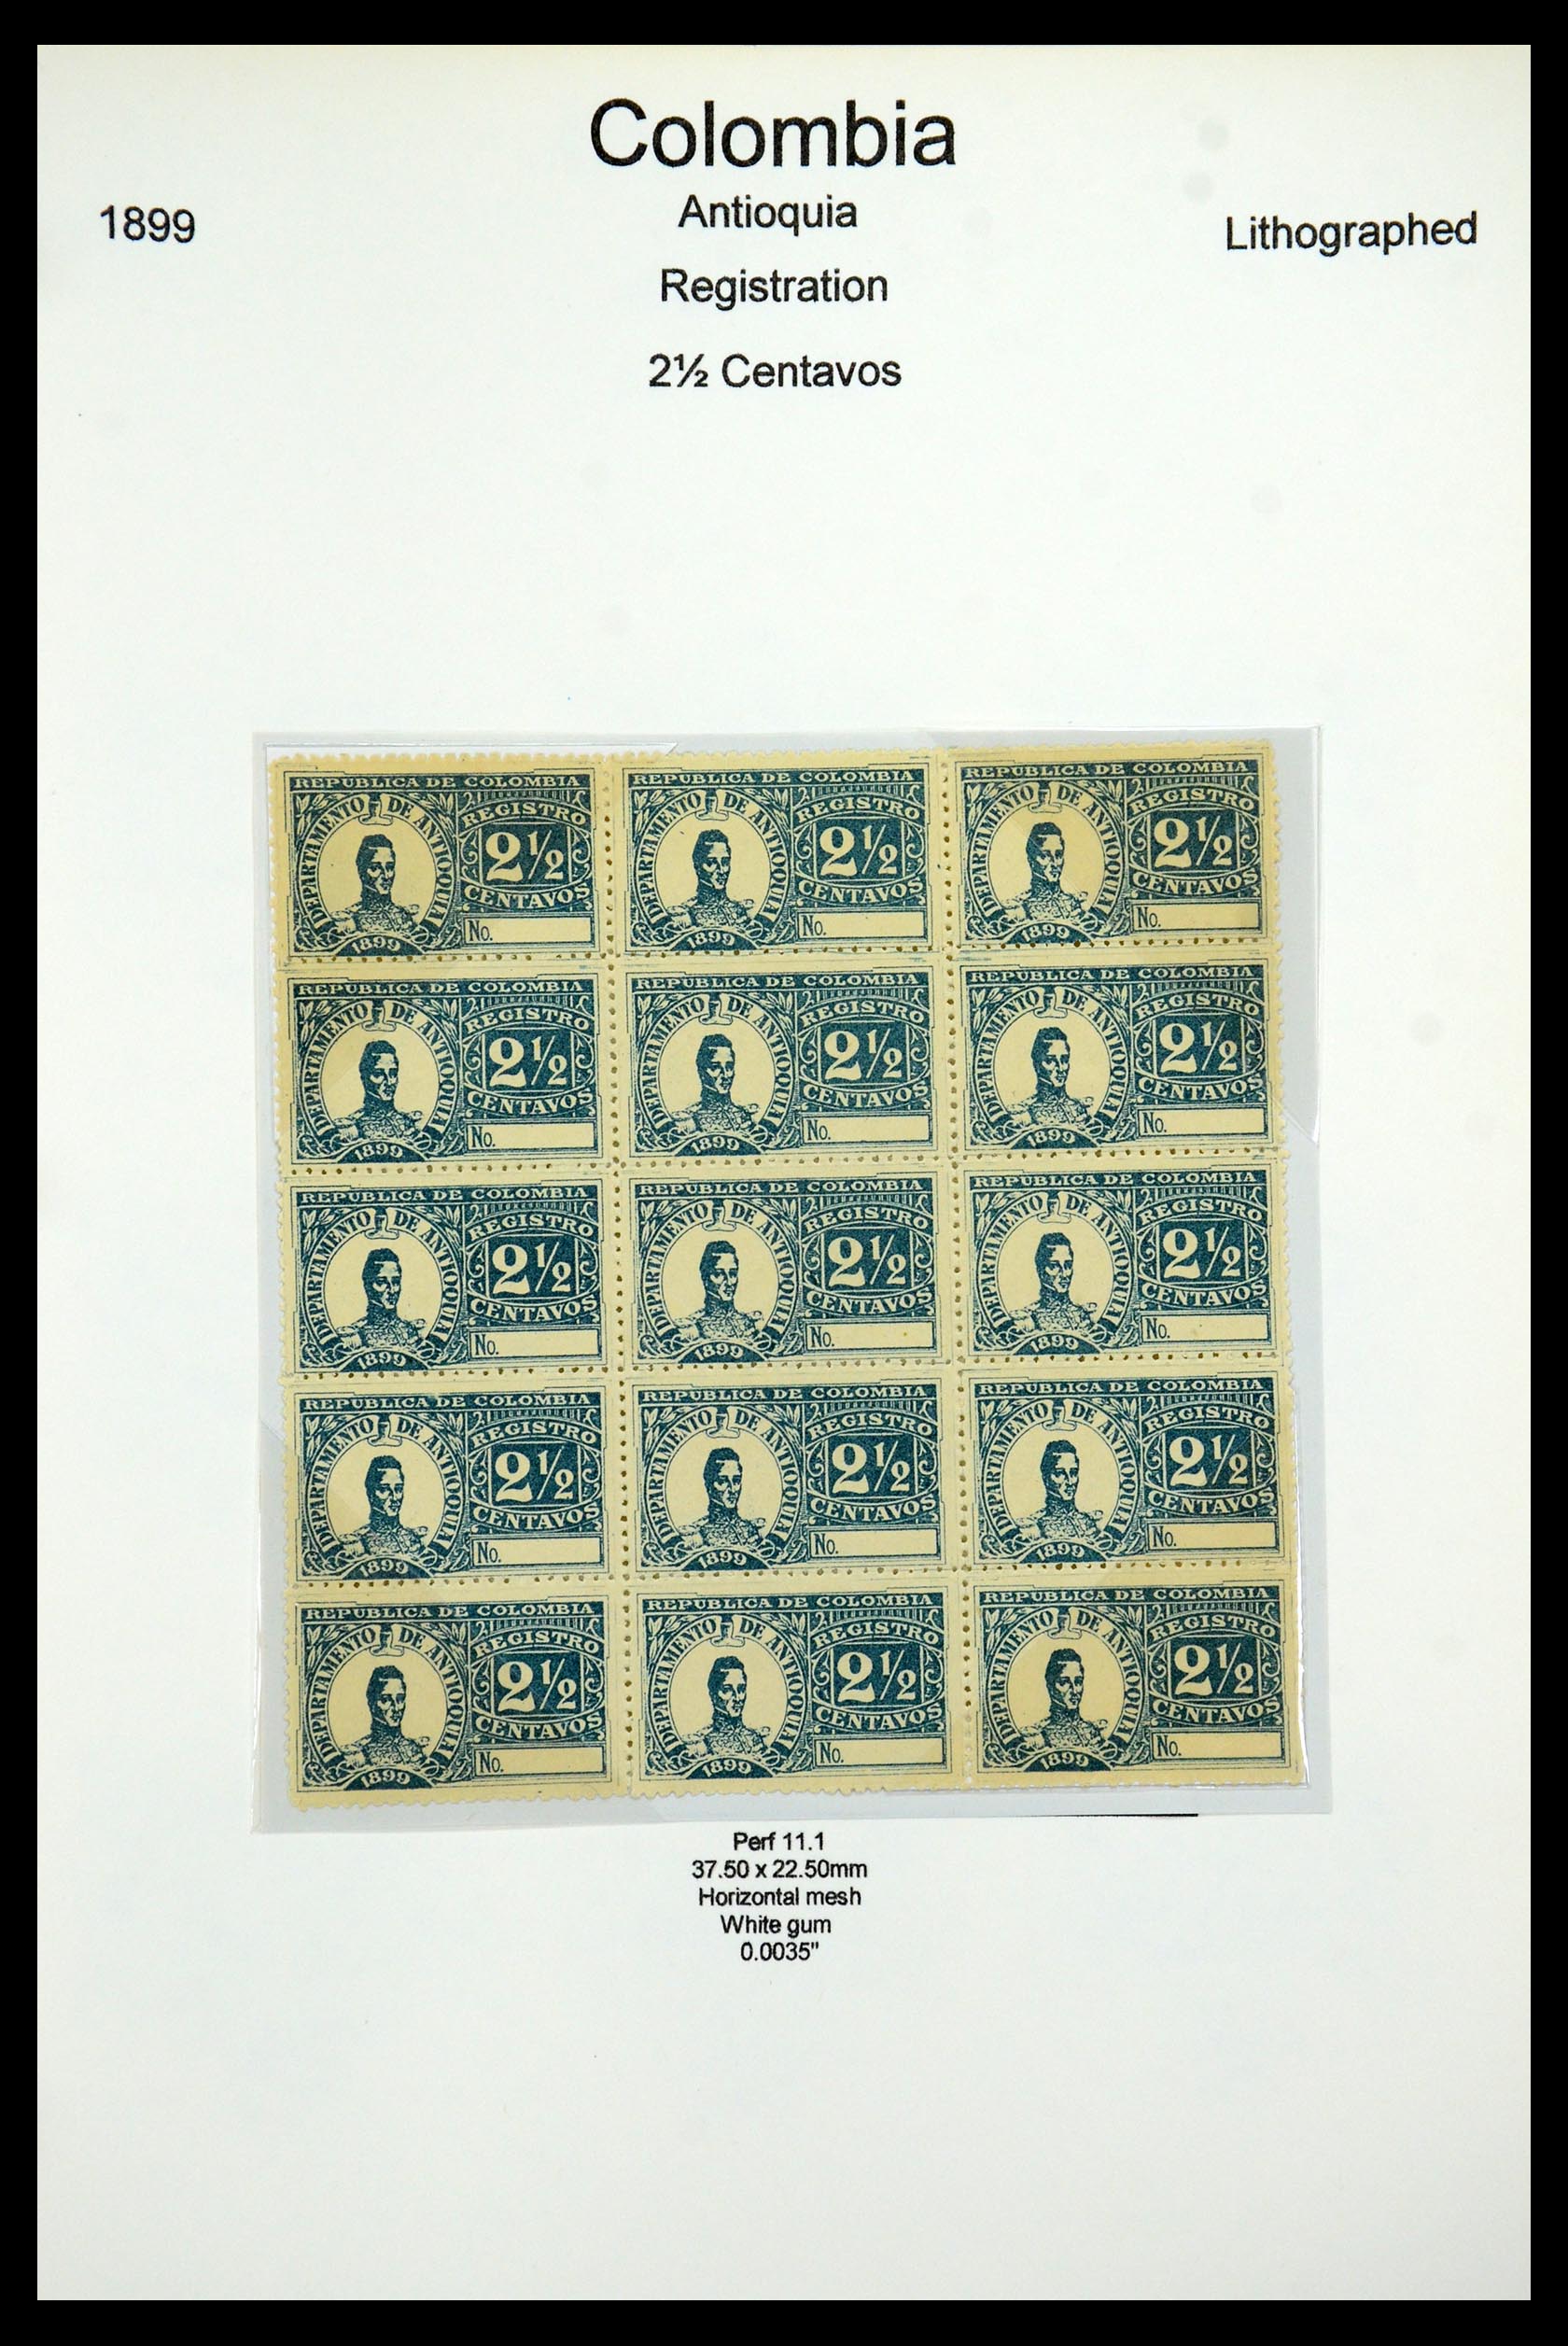 35519 077 - Stamp Collection 35519 Colombia Antioquia 1899.